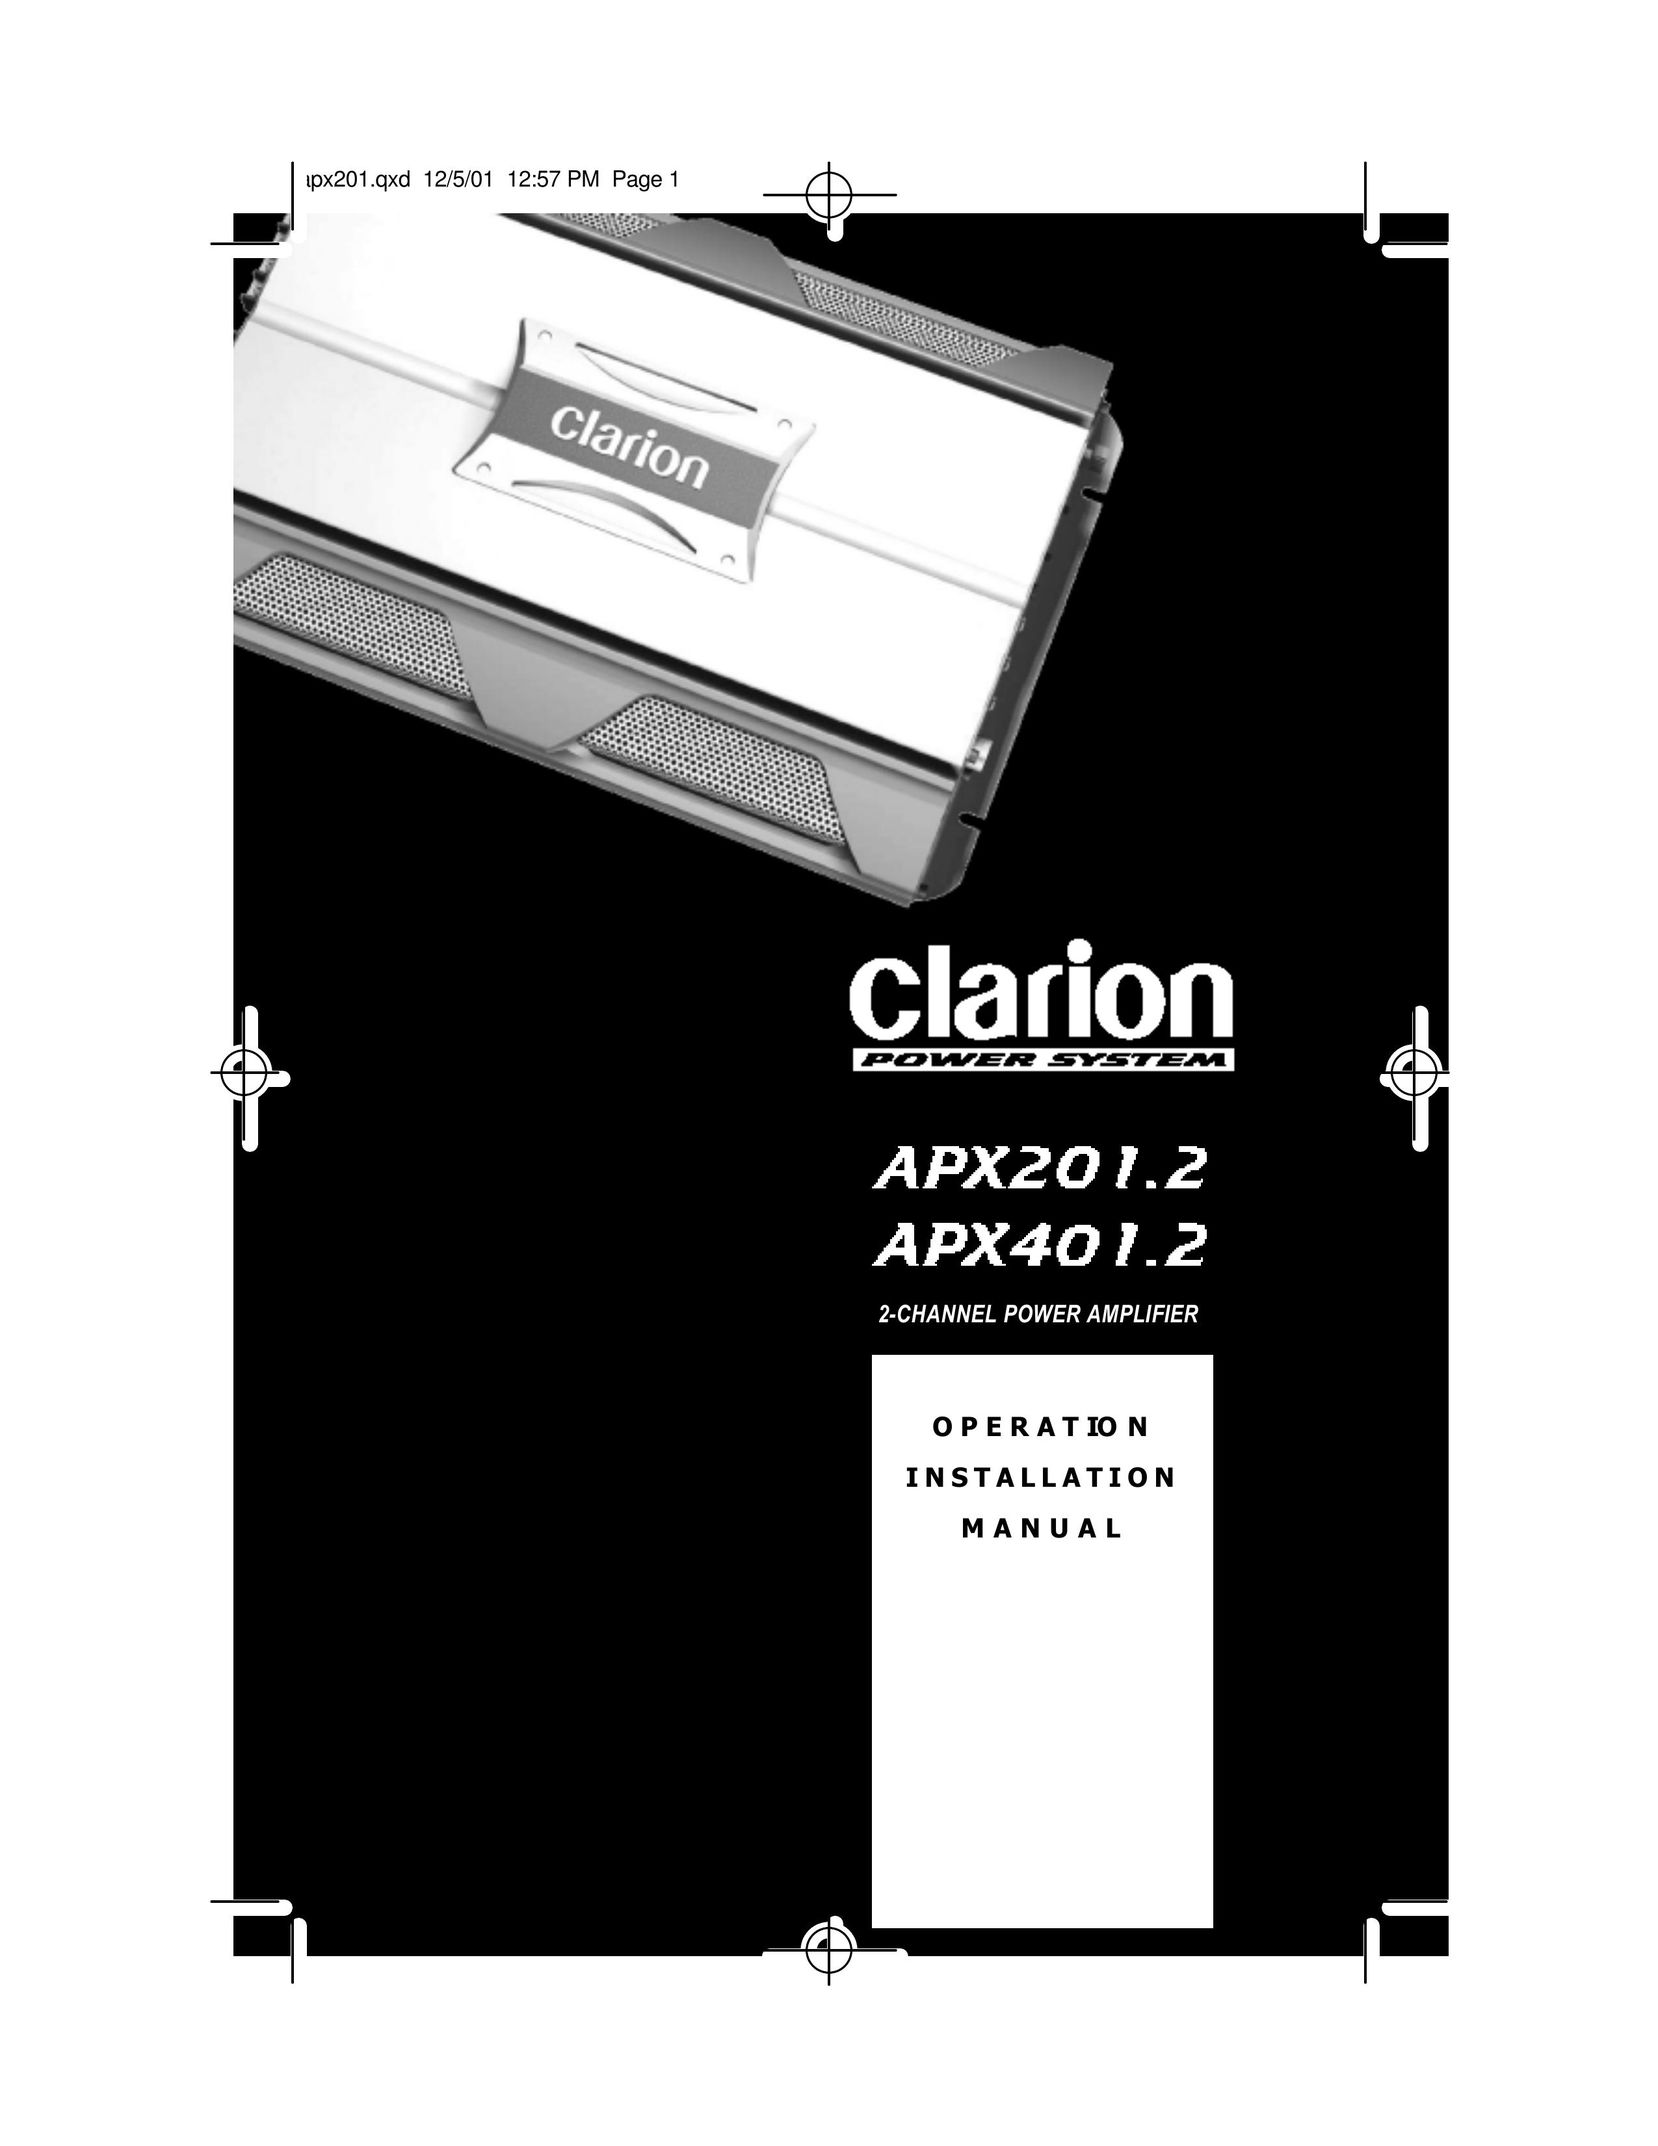 Clarion APX401.2 Stereo Amplifier User Manual